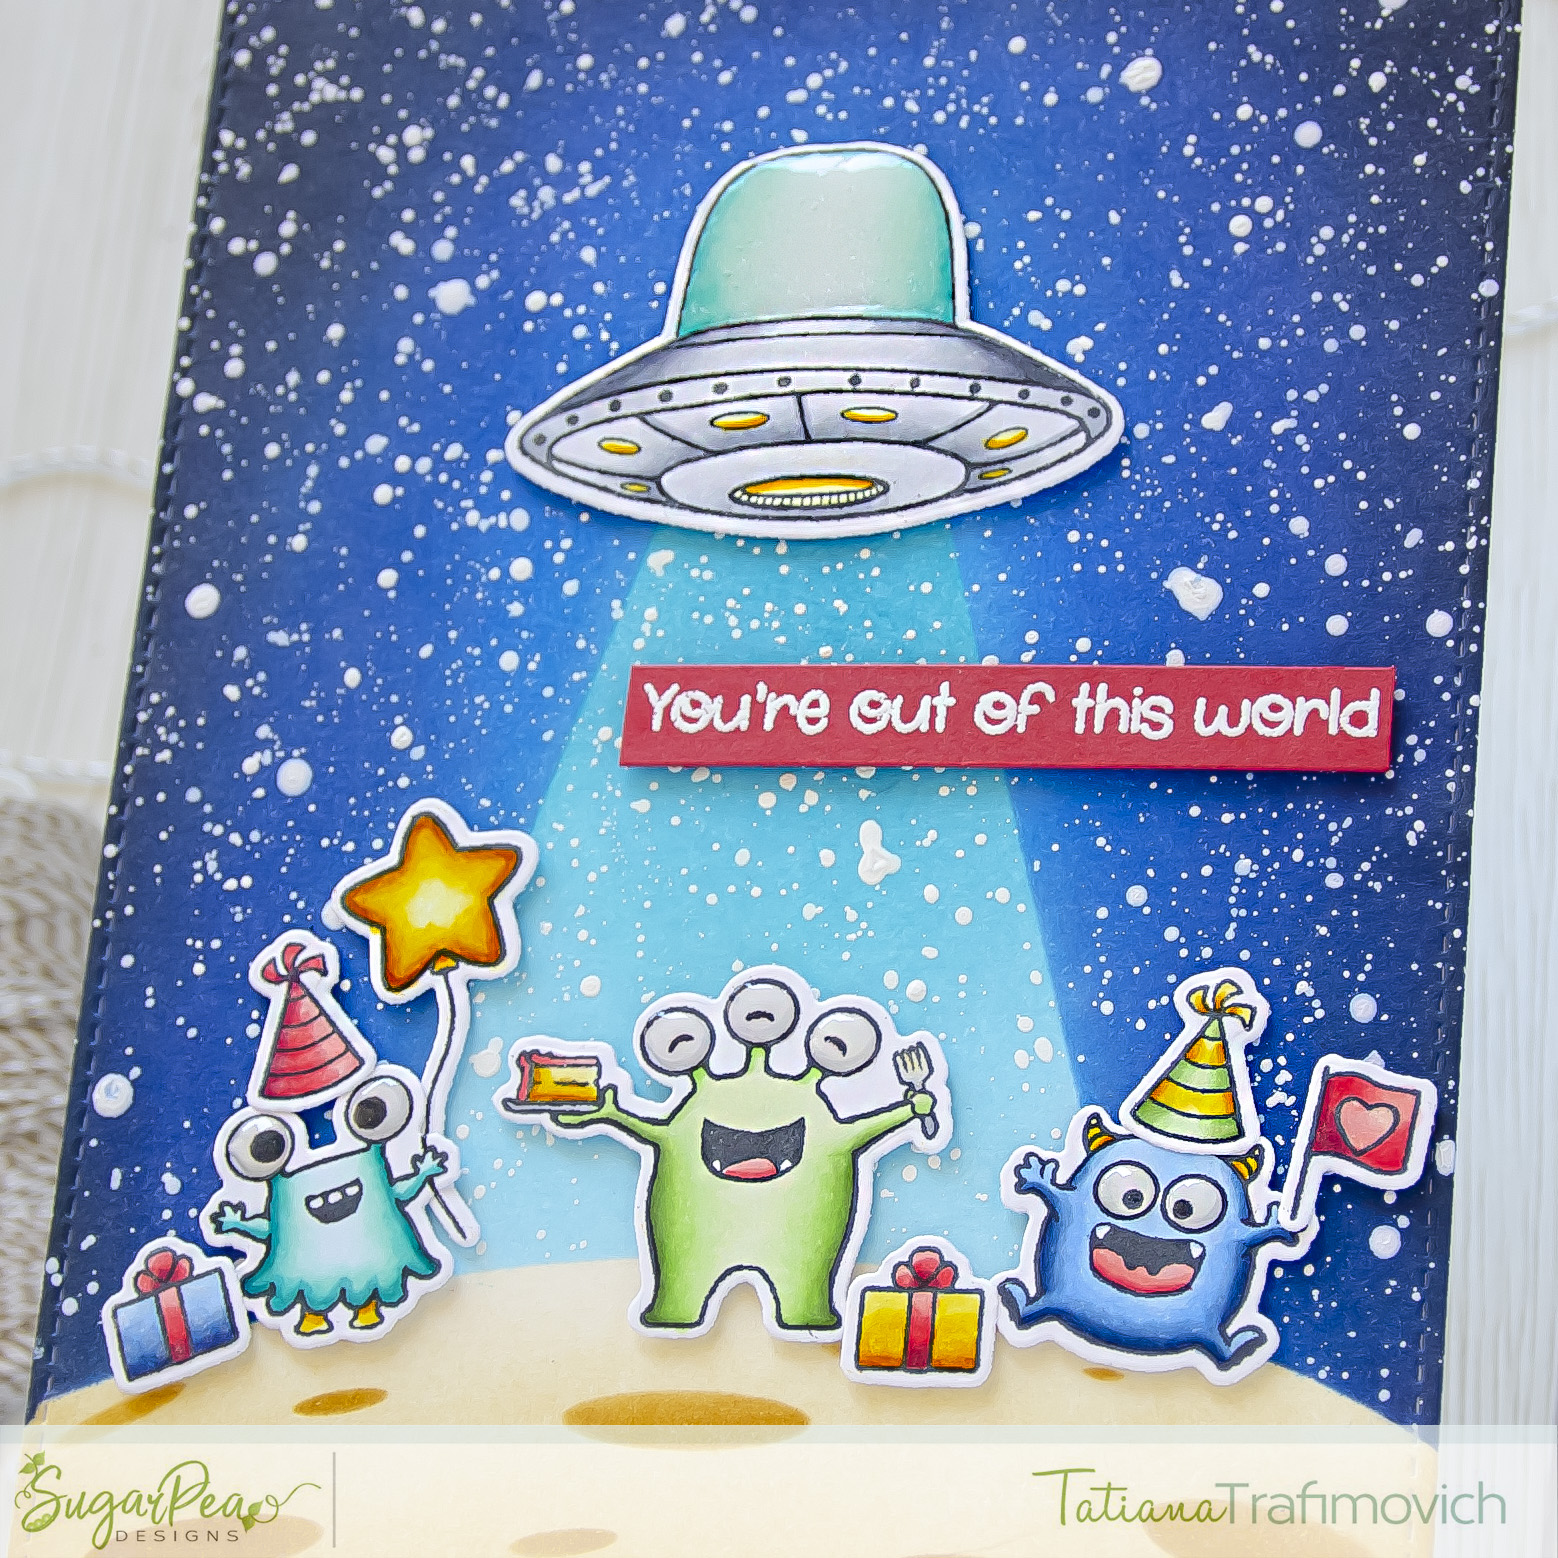 You're Out Of This World #handmade card by Tatiana Trafimovich #tatianacraftandart - Take Us To Your Cake stamp set by SugarPea Designs #sugarpeadesigns